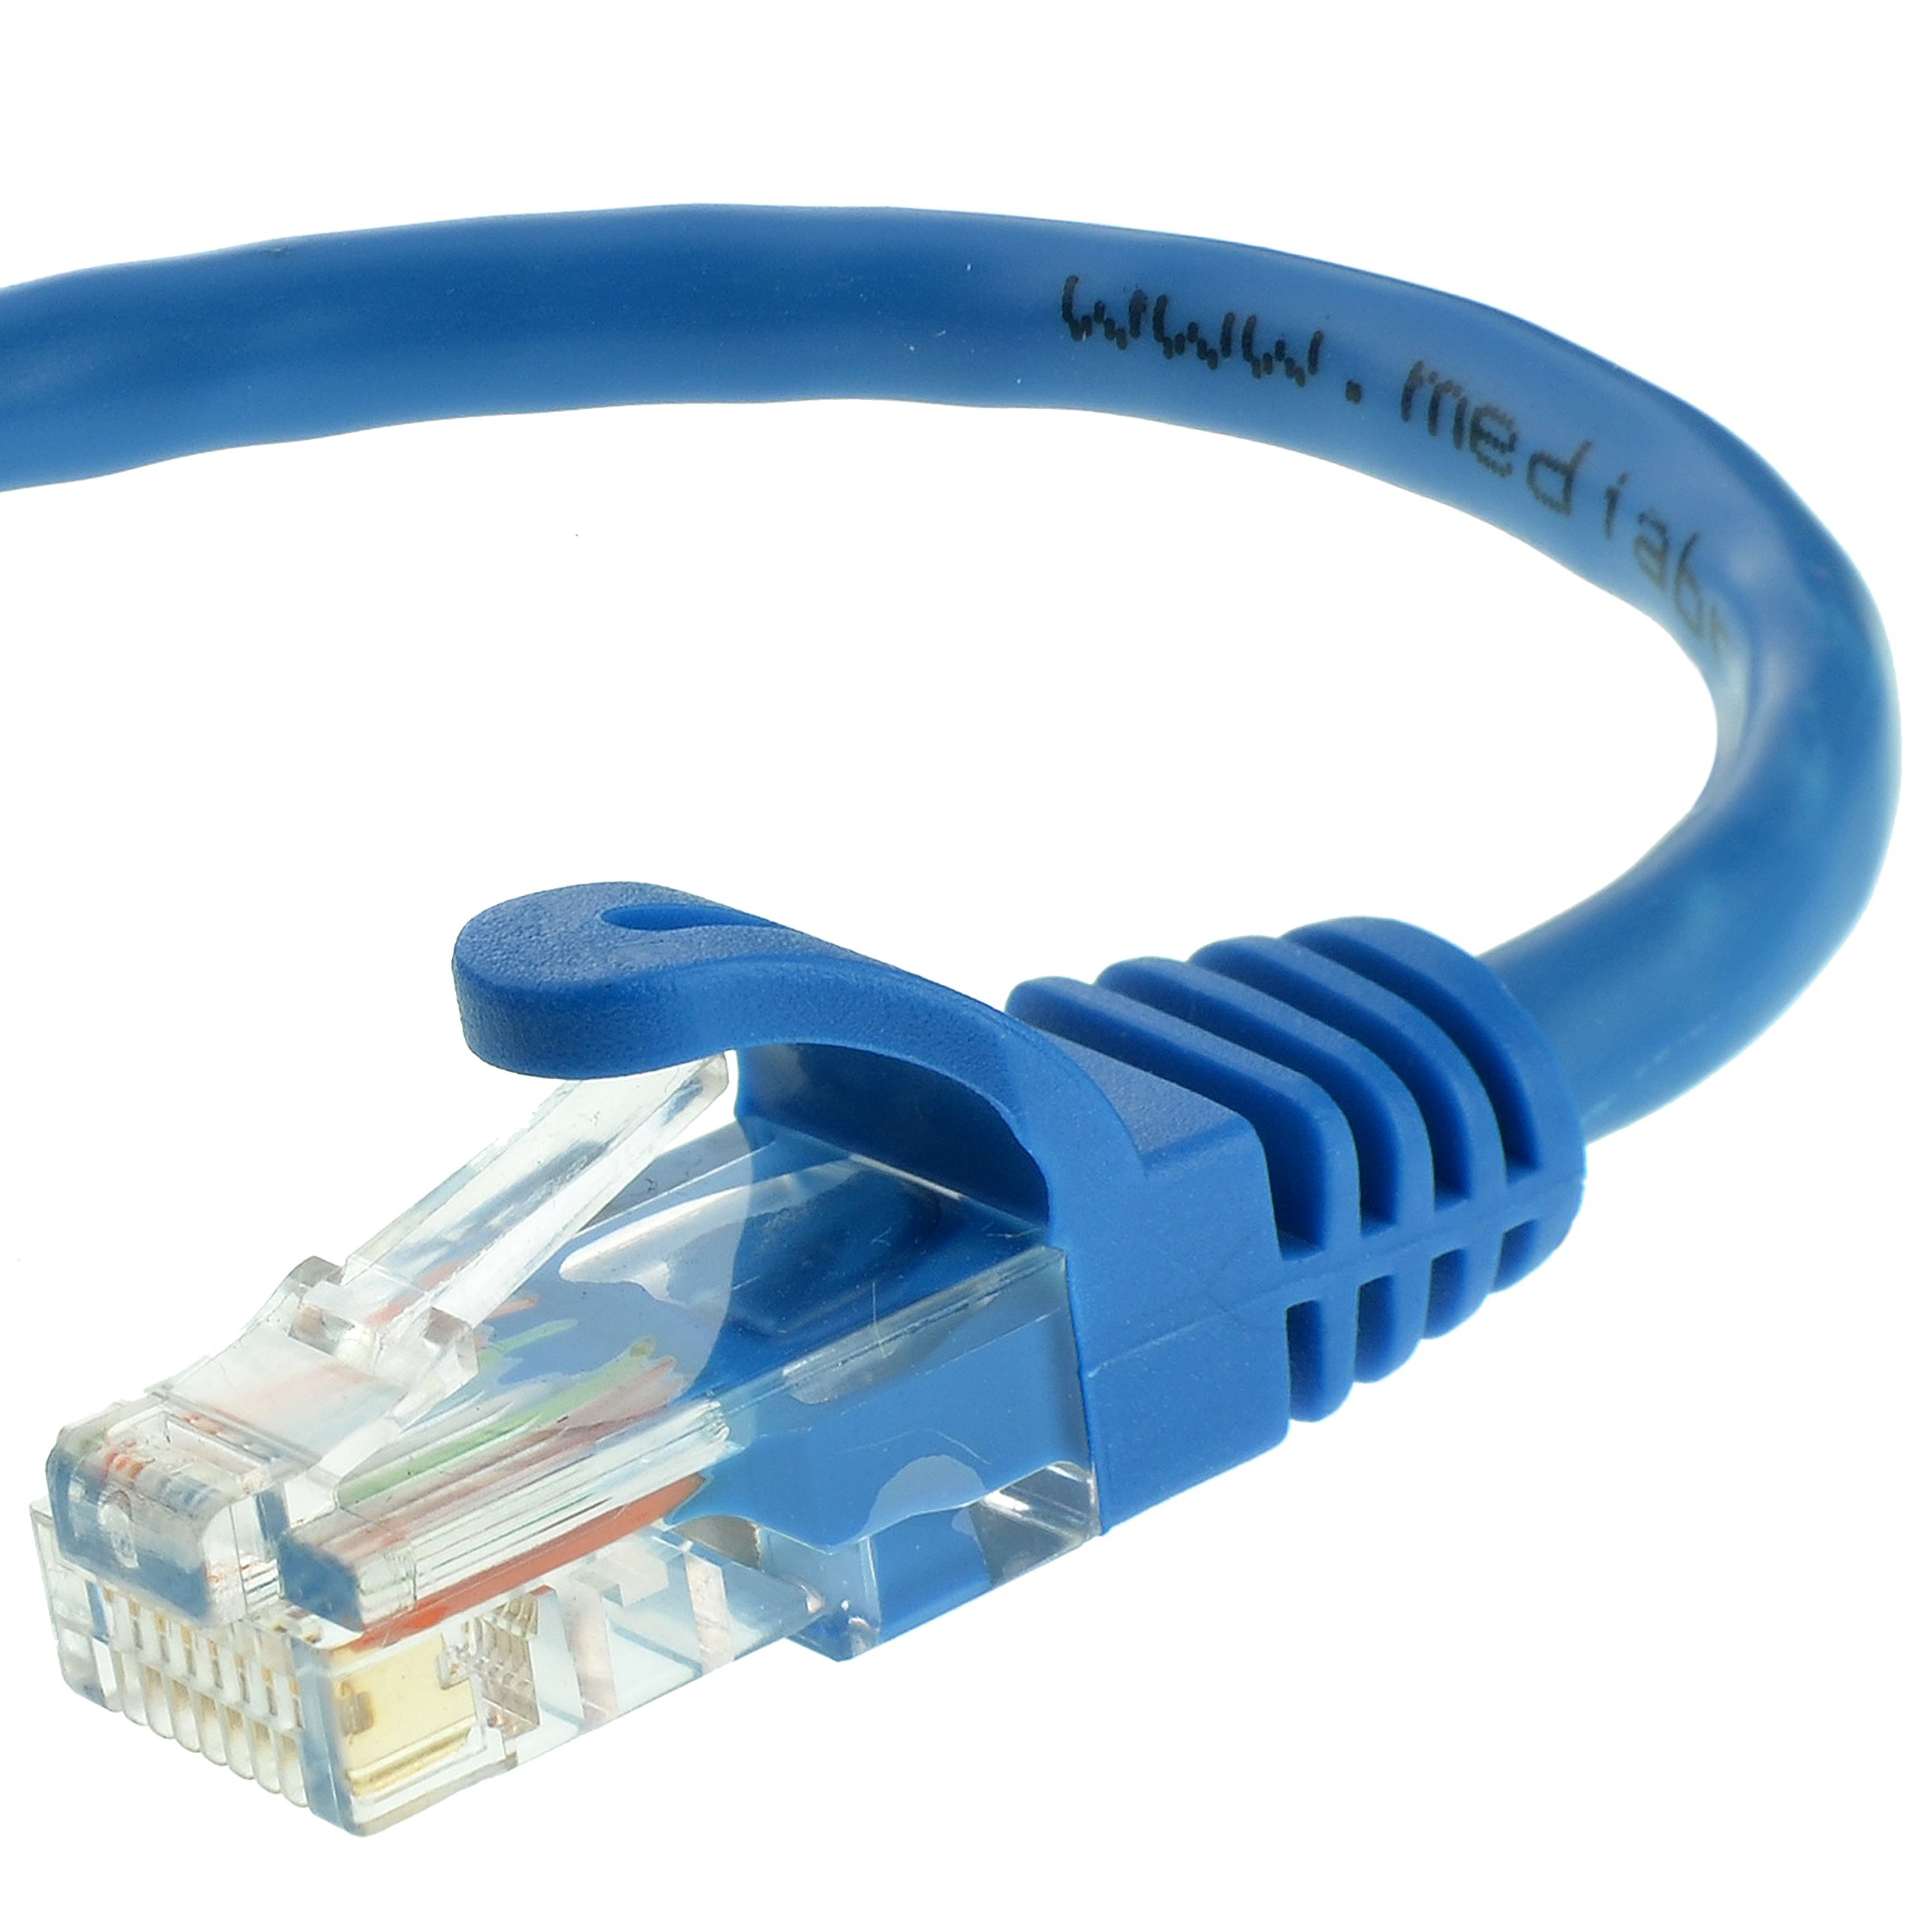 Book Cover Mediabridge™ Ethernet Cable (10 Feet) - Supports Cat6 / Cat5e / Cat5 Standards, 550MHz, 10Gbps - RJ45 Computer Networking Cord (Part# 31-399-10X)